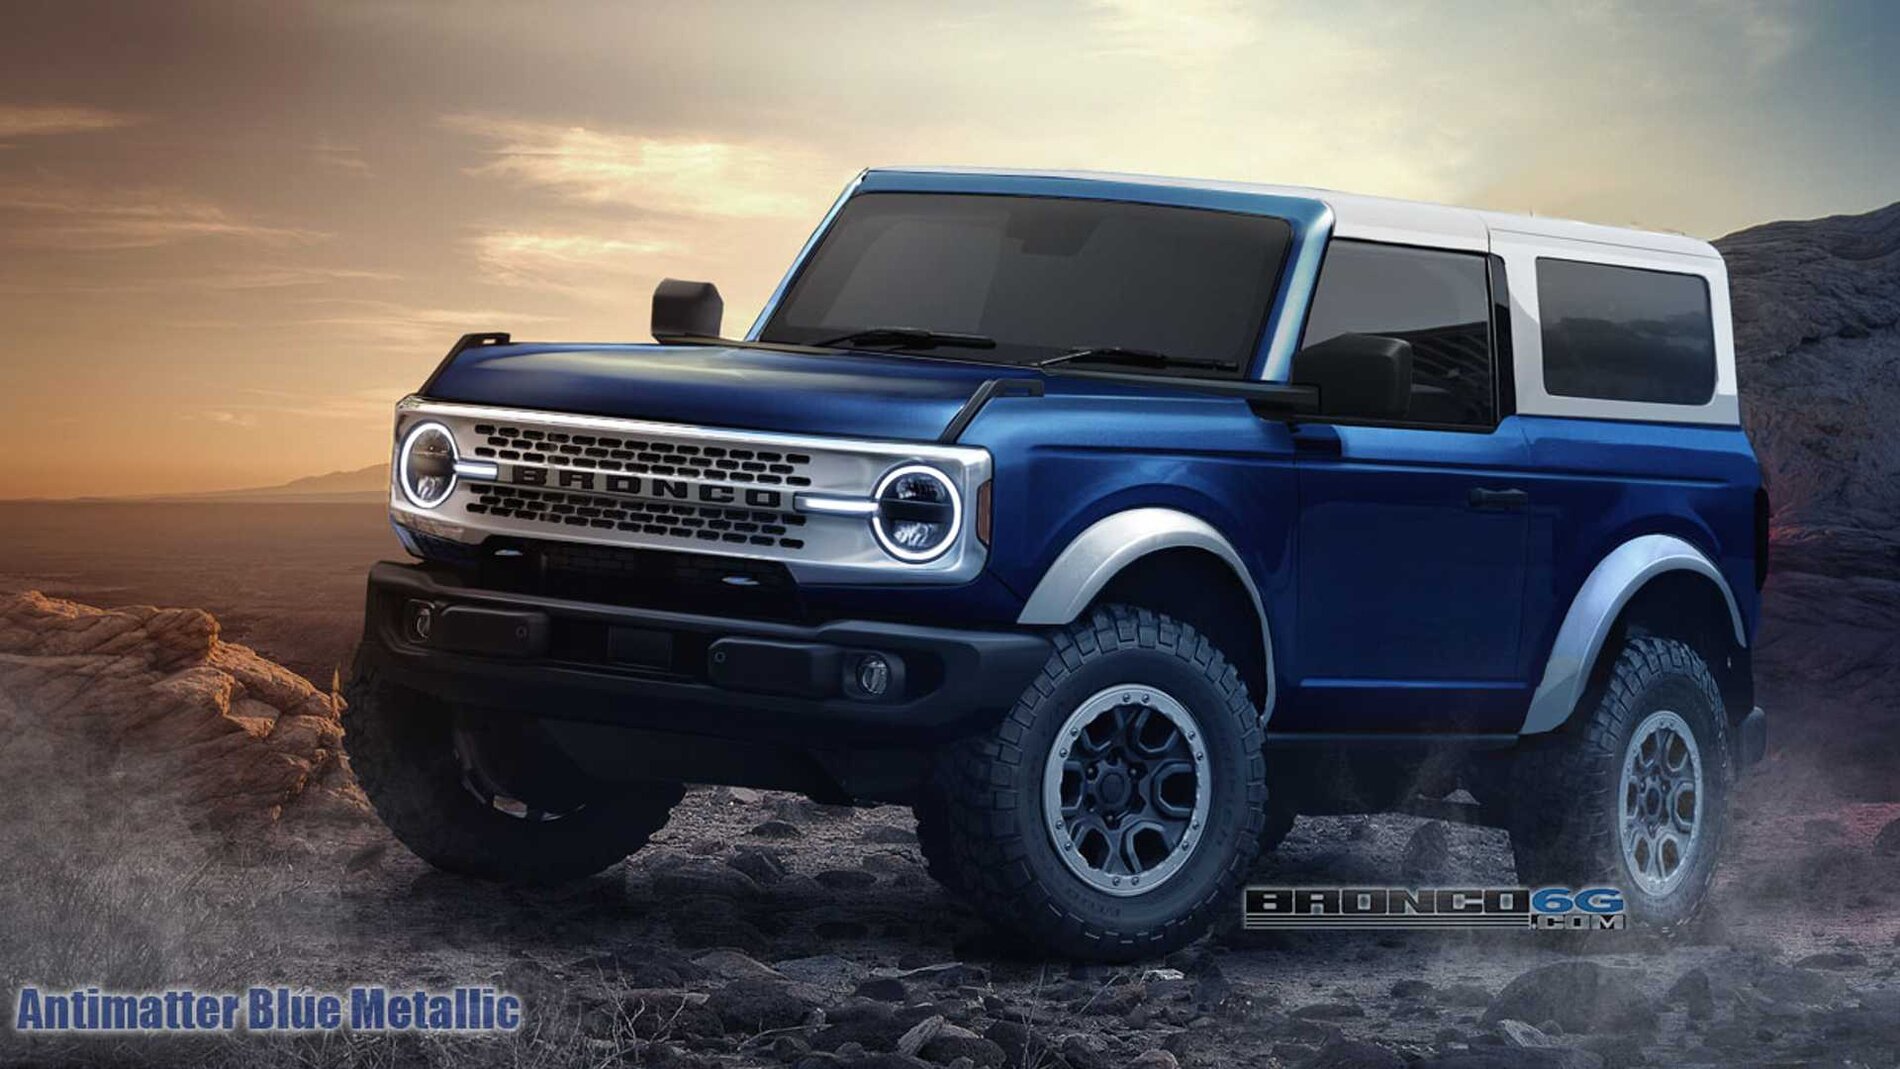 Ford Bronco Photoshop request with existing white top 4DBF8032-B46A-403C-A3FF-EDFC04A95651